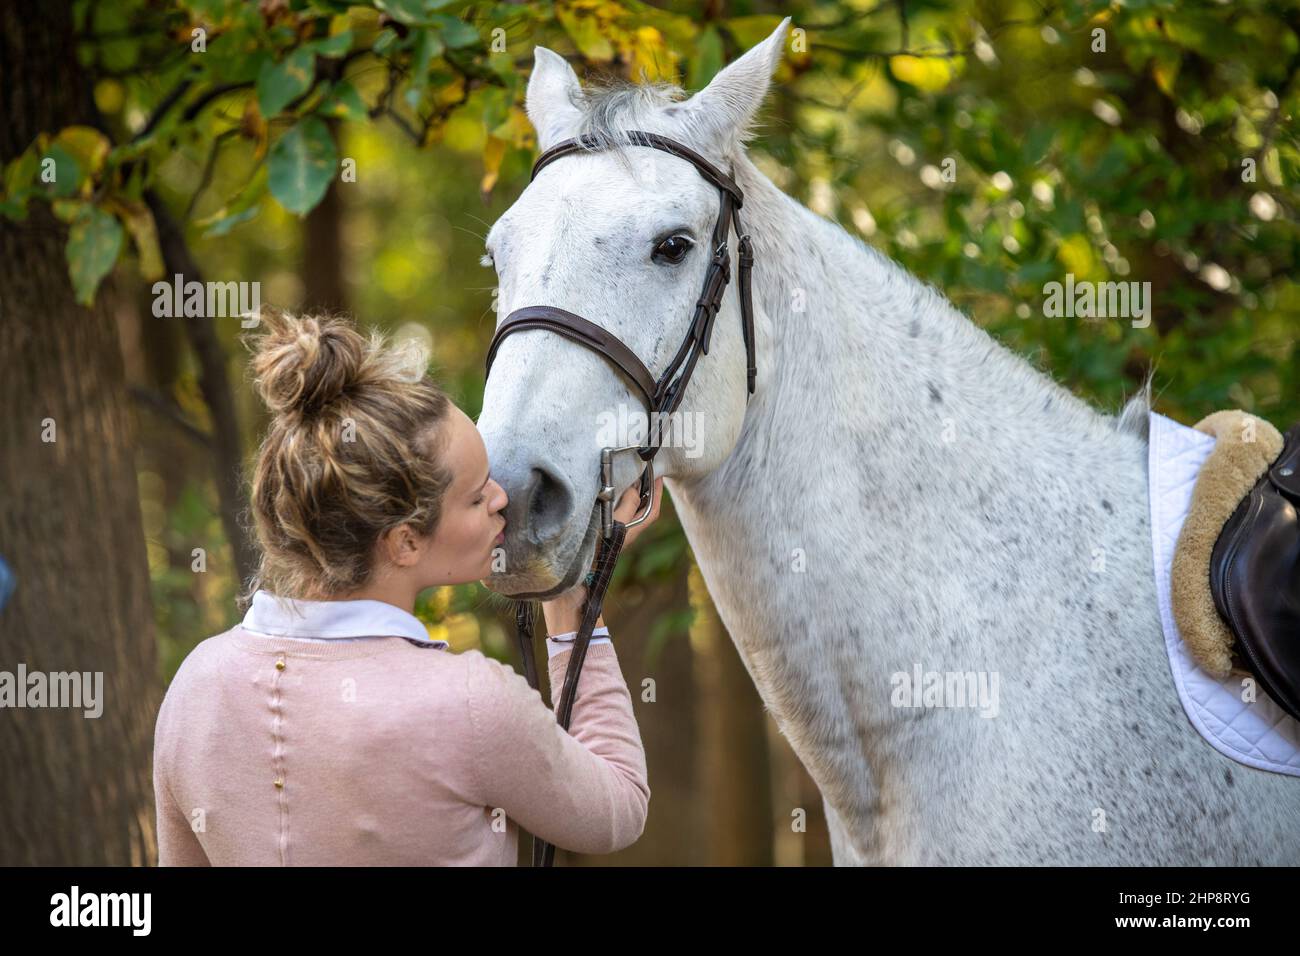 Woman kissing nose of horse Stock Photo